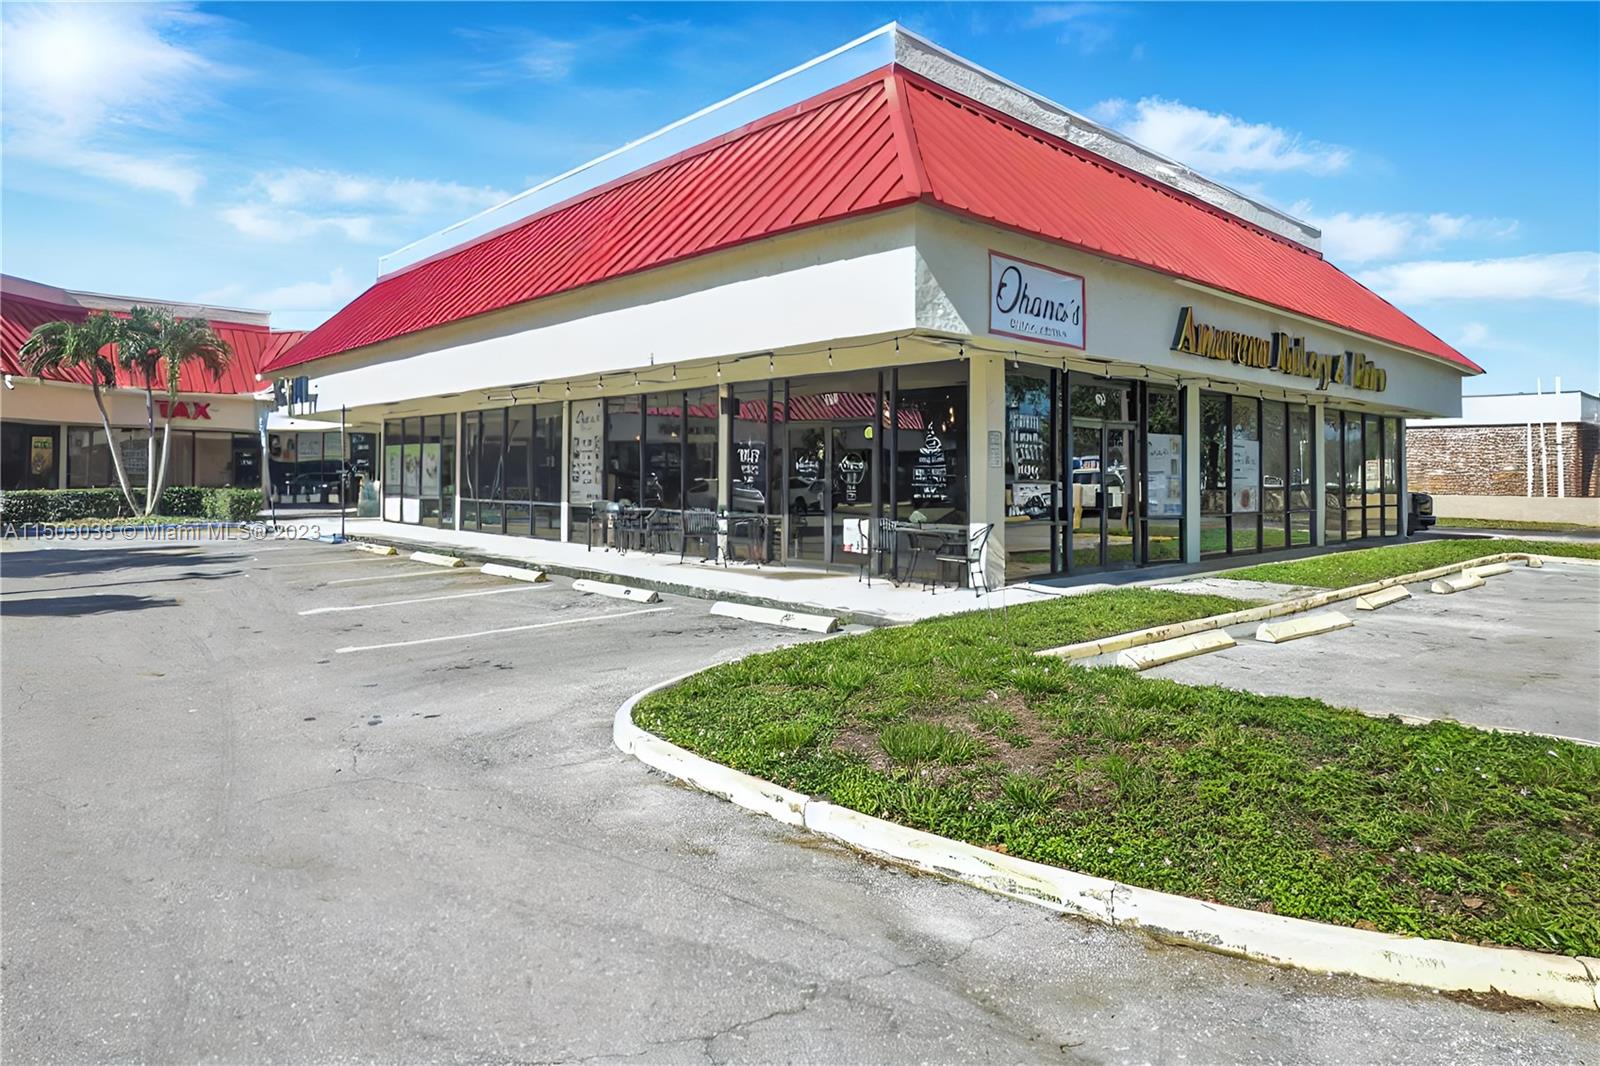 University Dr, lauderhill 33351, Other City - In The State Of Florida, FL 33351